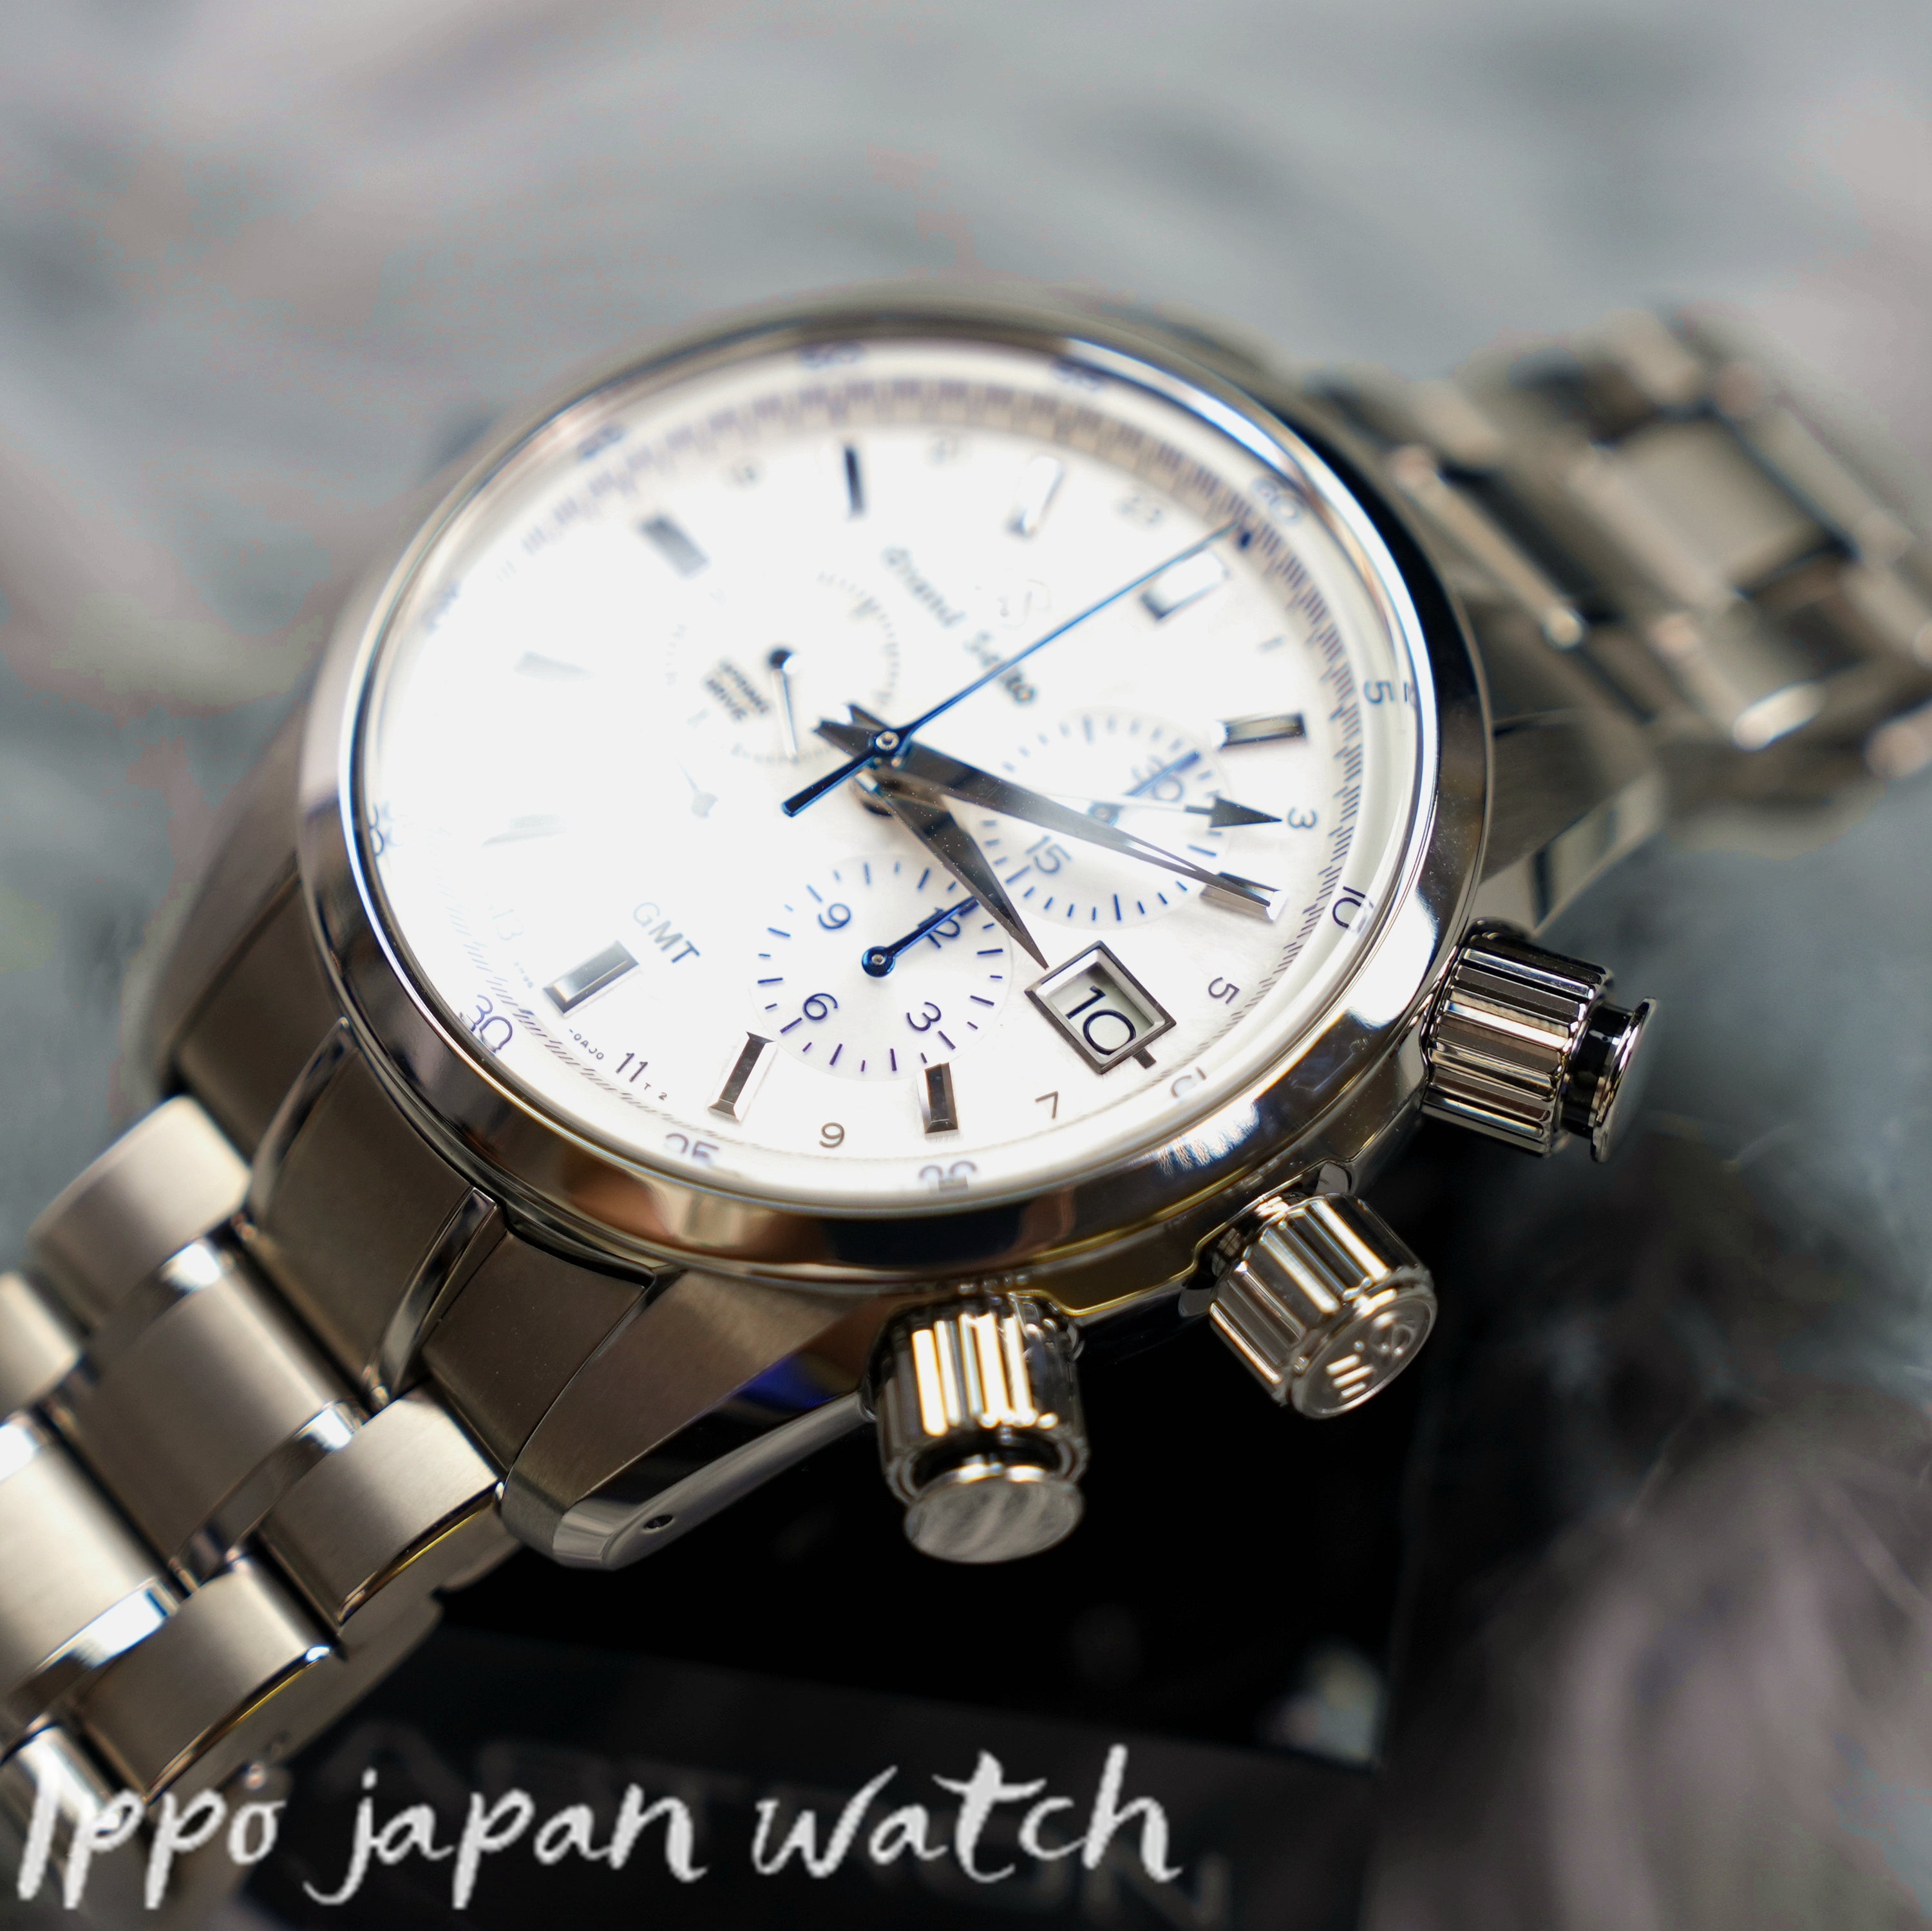 Grand Seiko Sport Collection SBGC247 Limited to 700 worldwide watch - IPPO JAPAN WATCH 